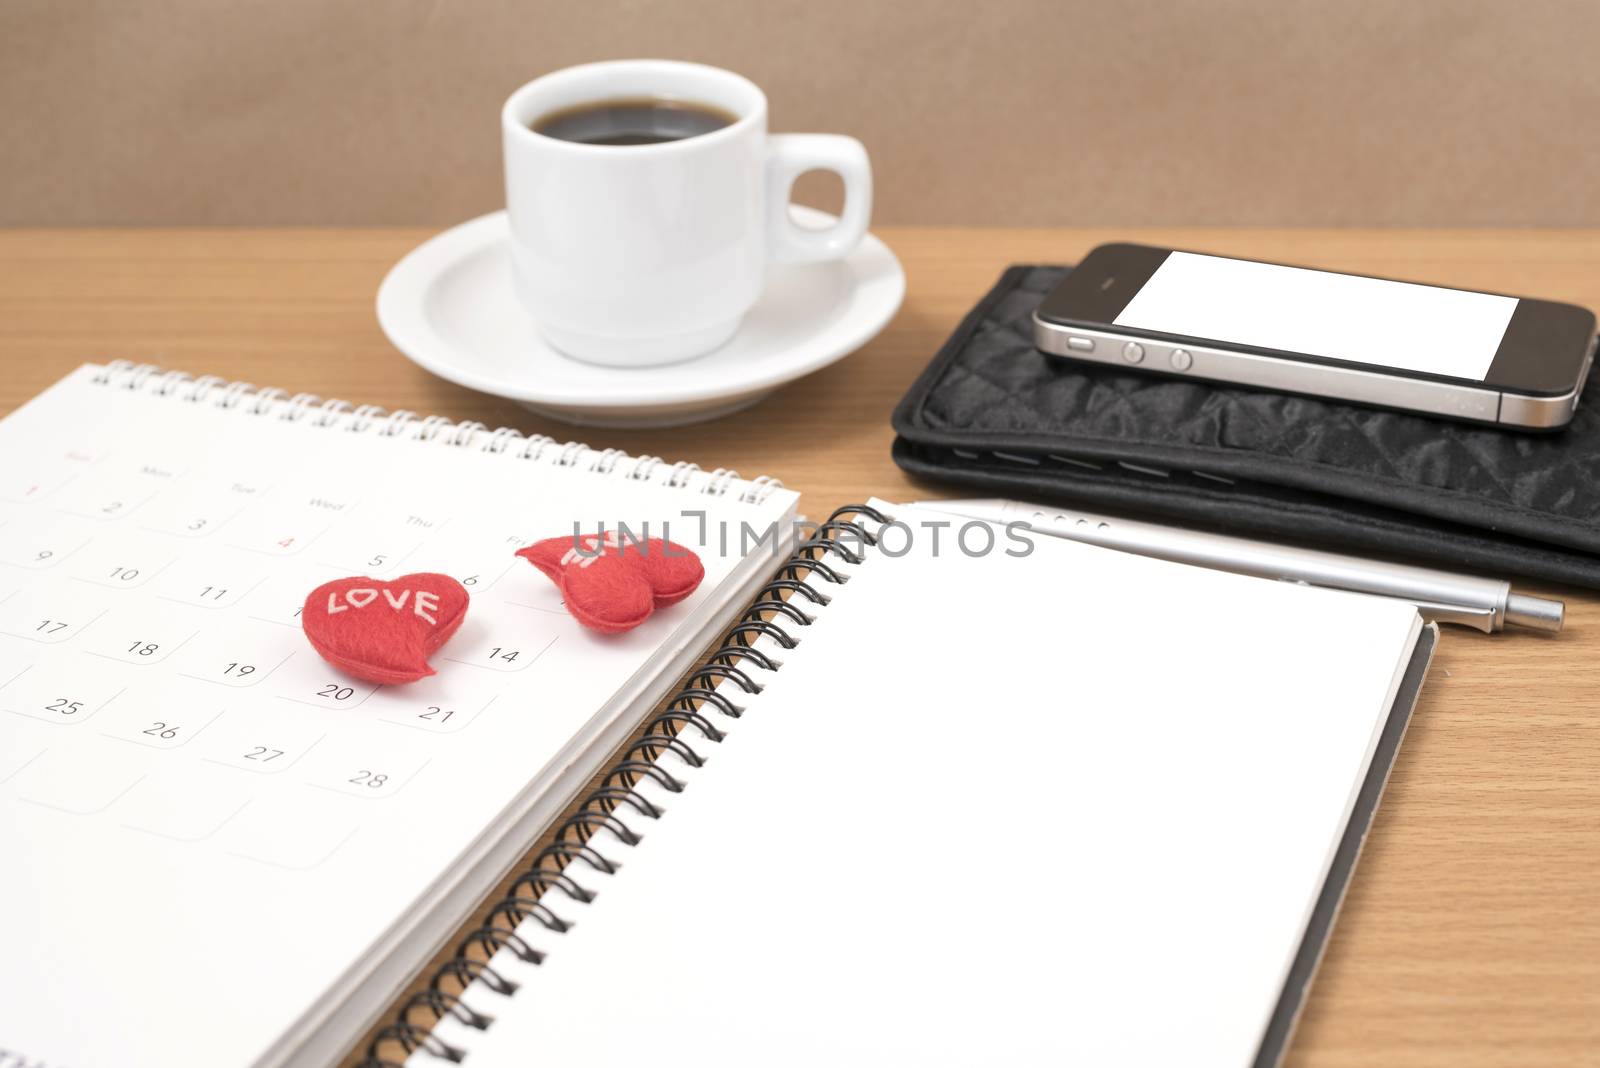 office desk : coffee with phone,wallet,calendar,heart,notepad on wood background